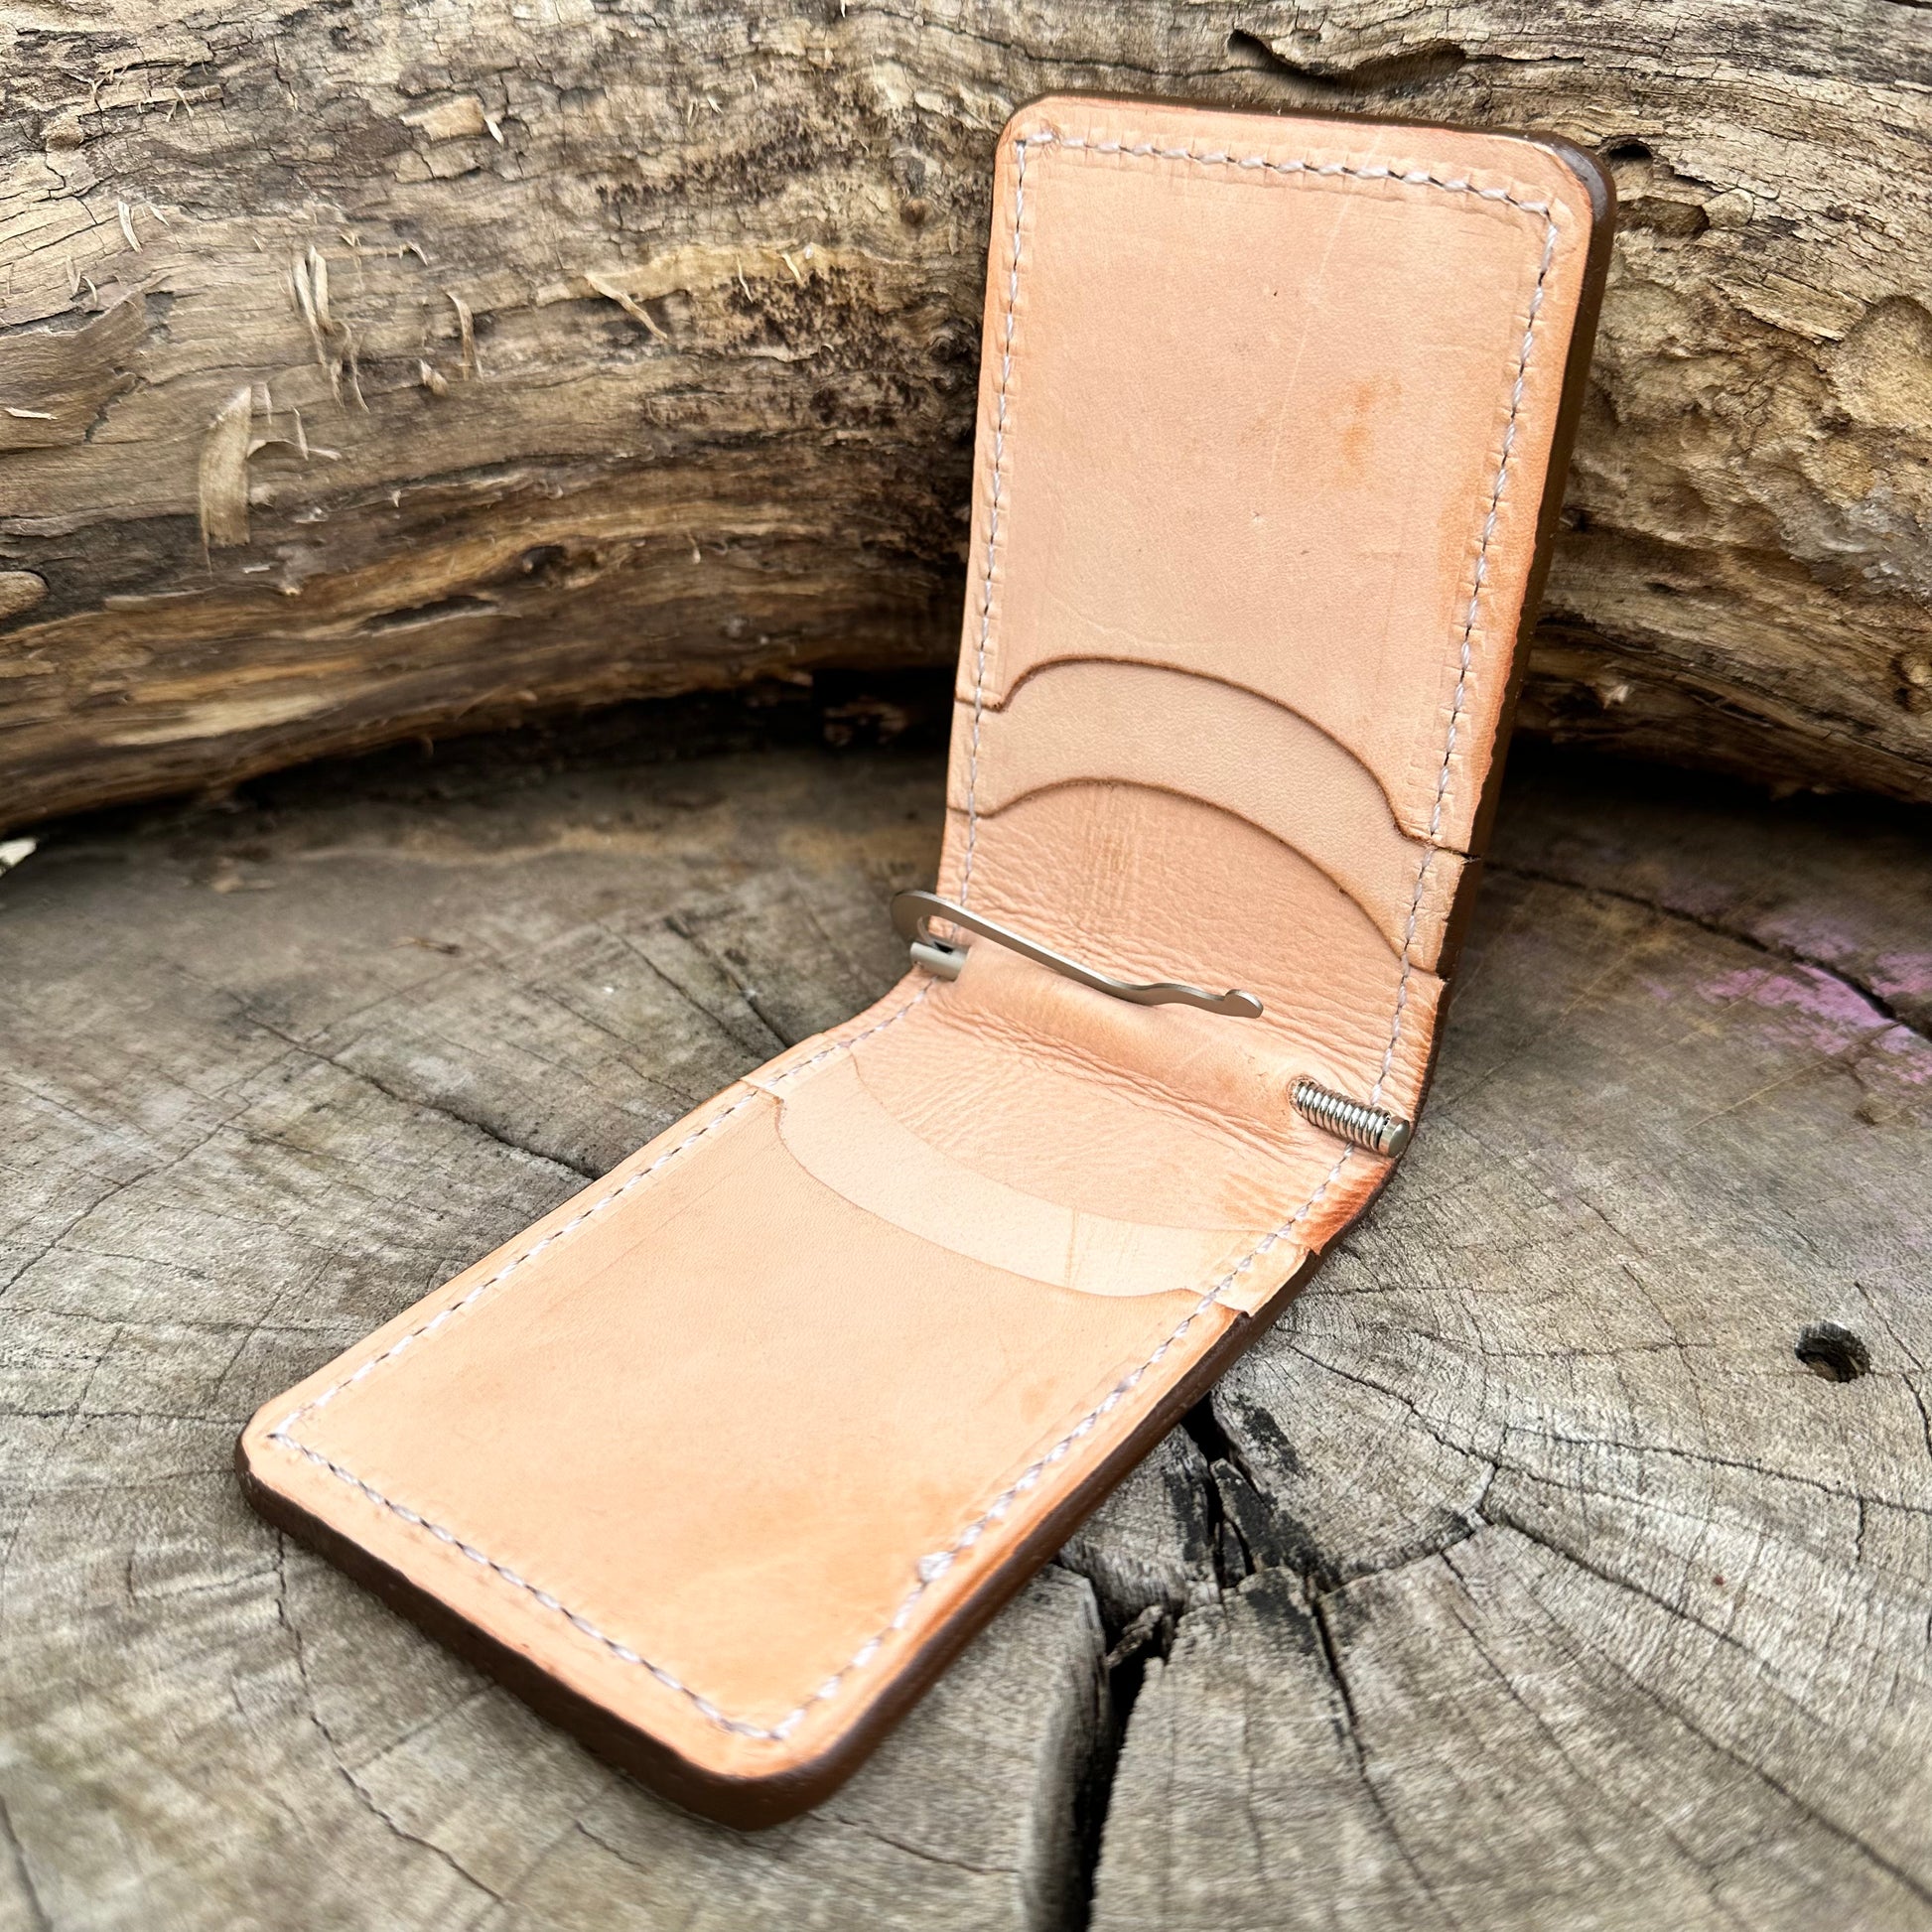 Hand-Tooled BSR Money Clip Wallet, BSR Leather Co.